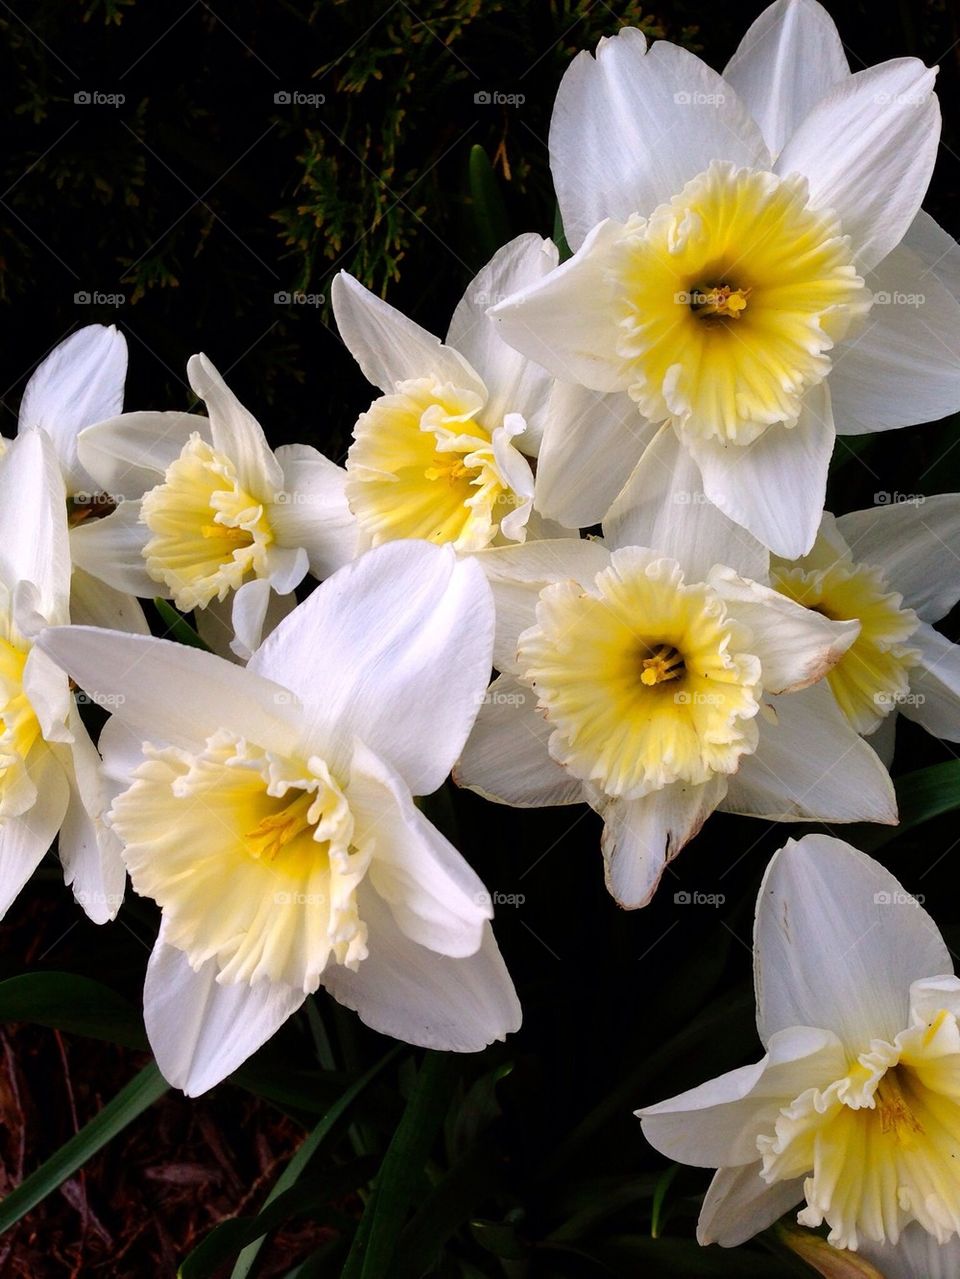 Blooming daffodils in spring